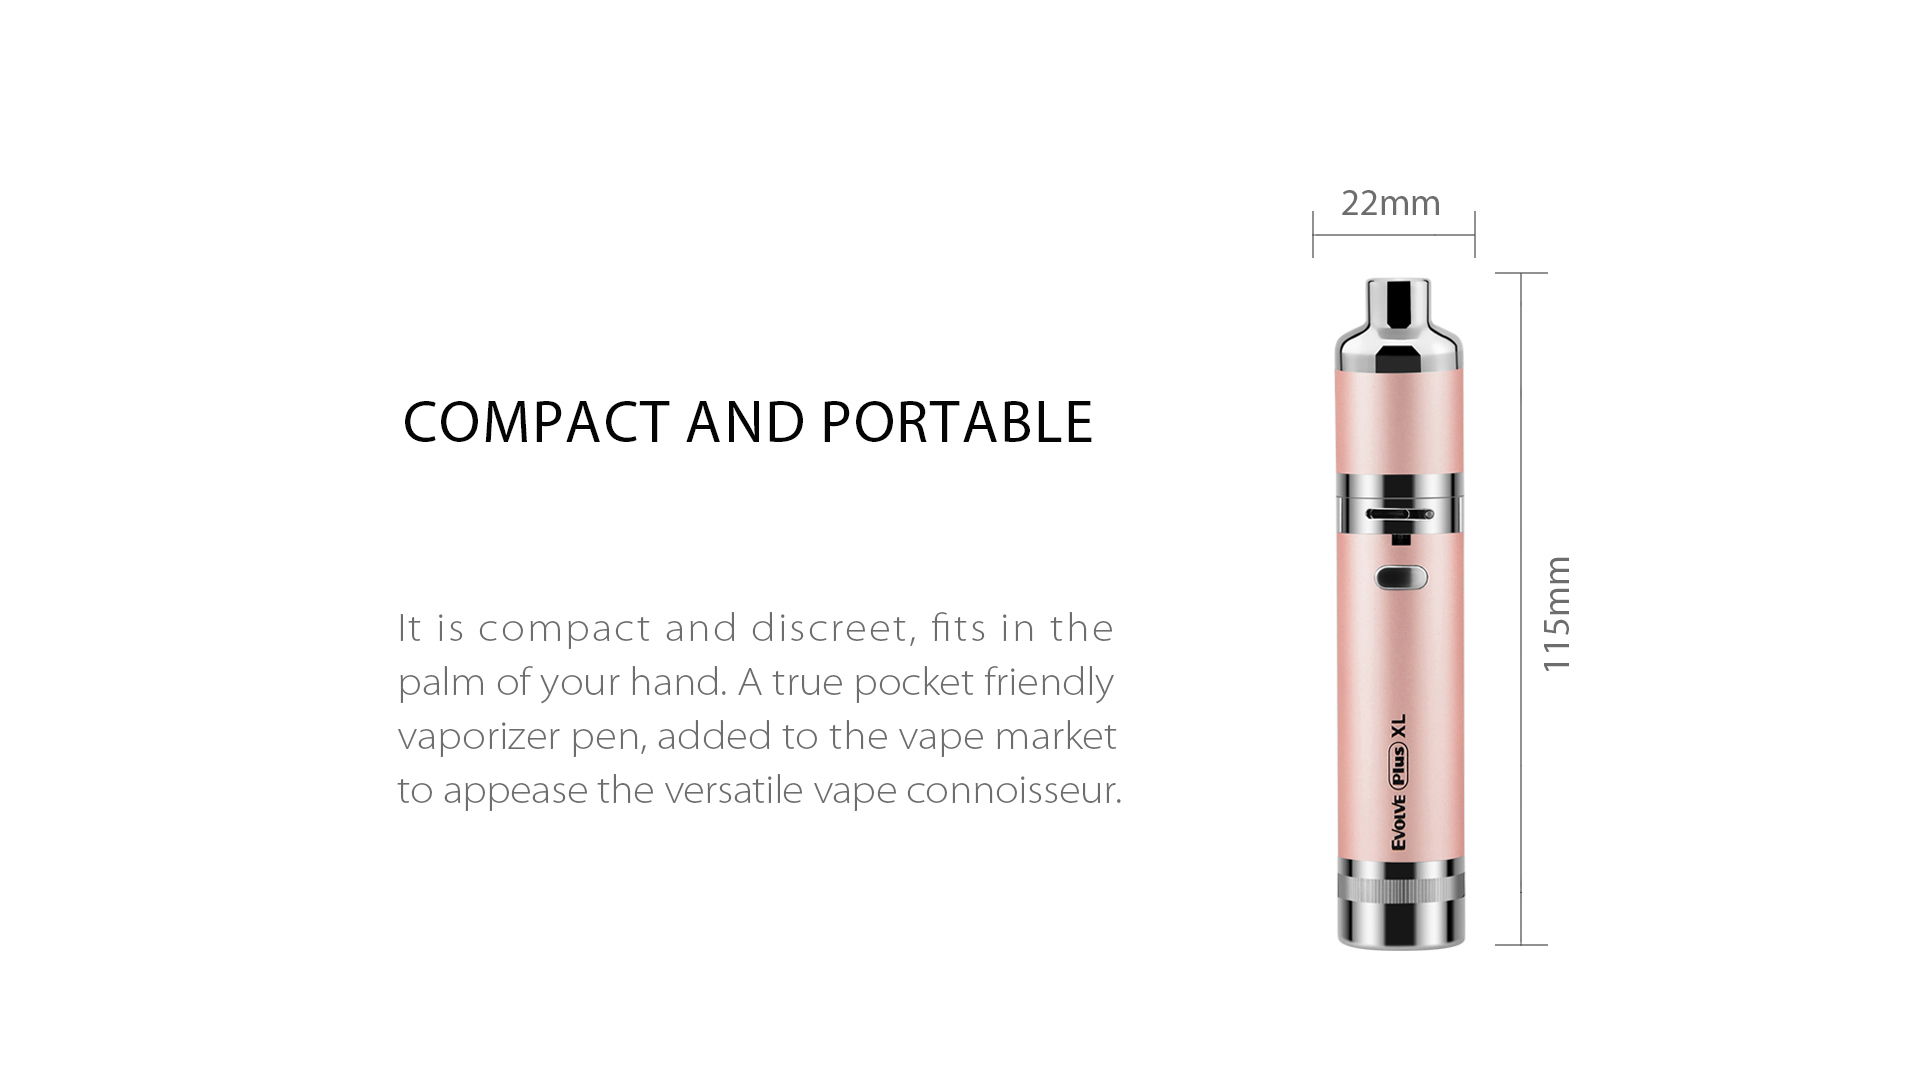 Yocan Evolve Plus XL Vaporizer 2020 version is compact and portable.